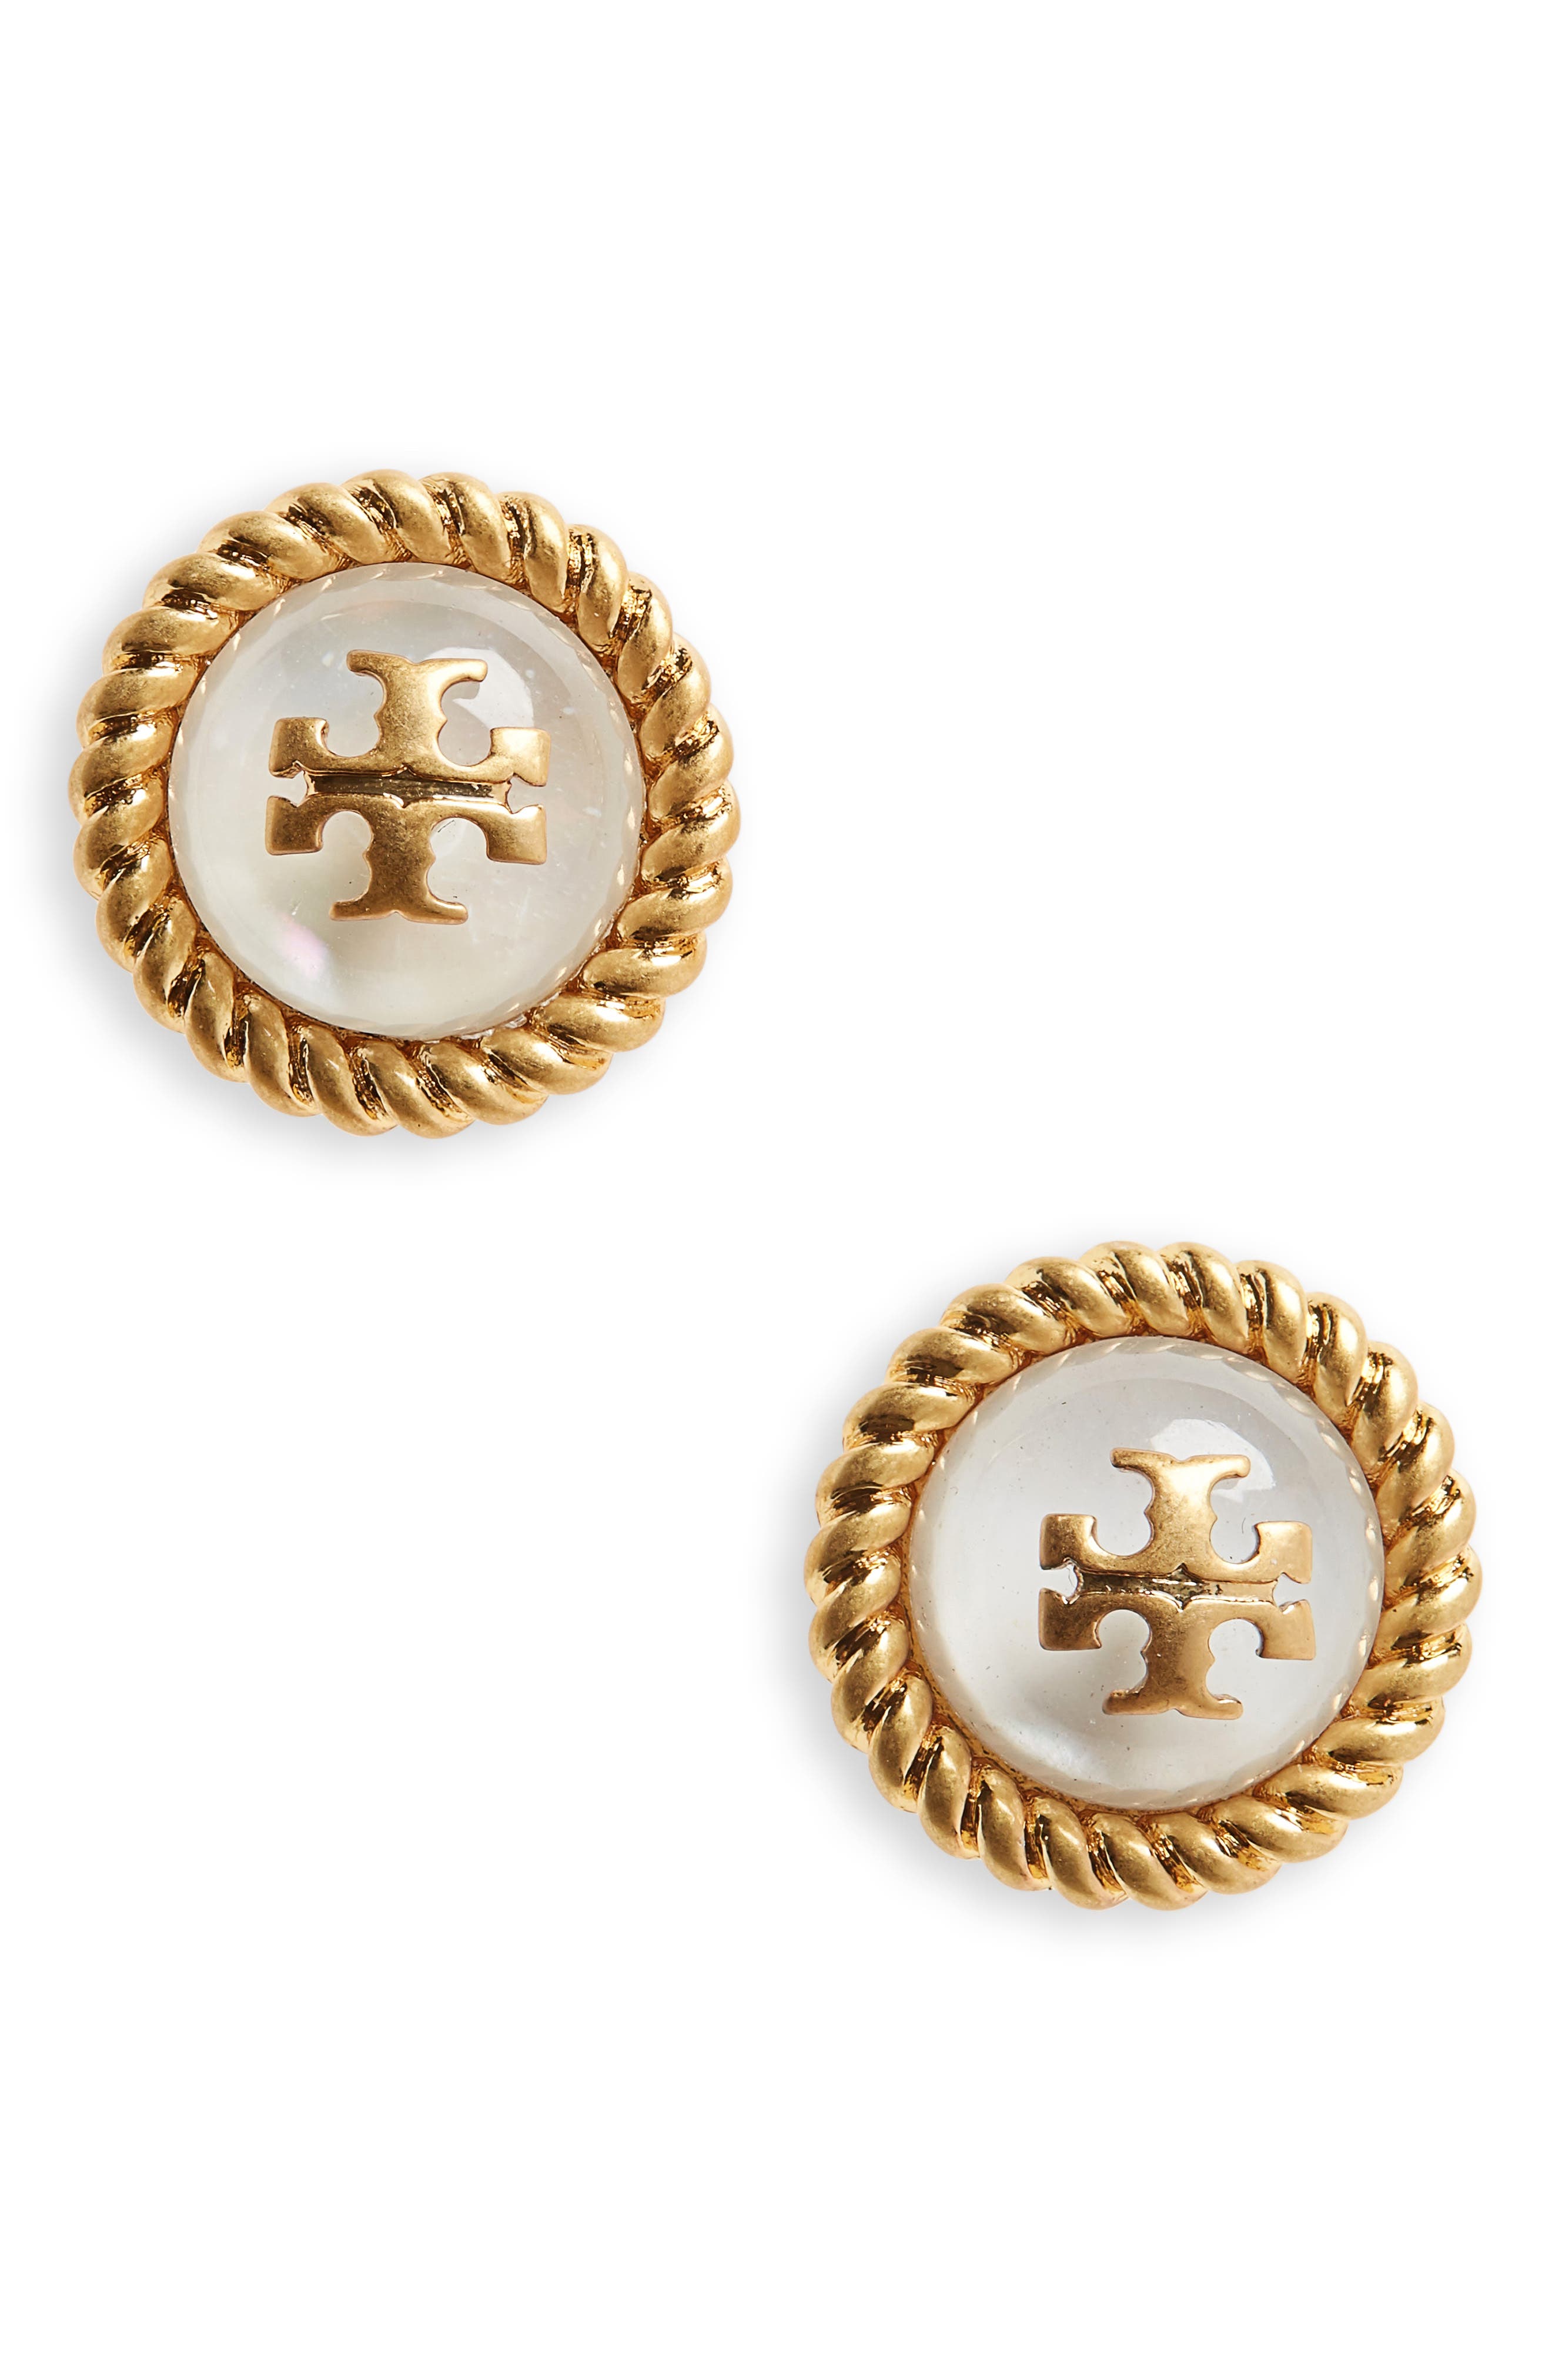 Tory Burch Kira Glass Circle Stud Earrings in Rolled Brass /Mother Of Pearl